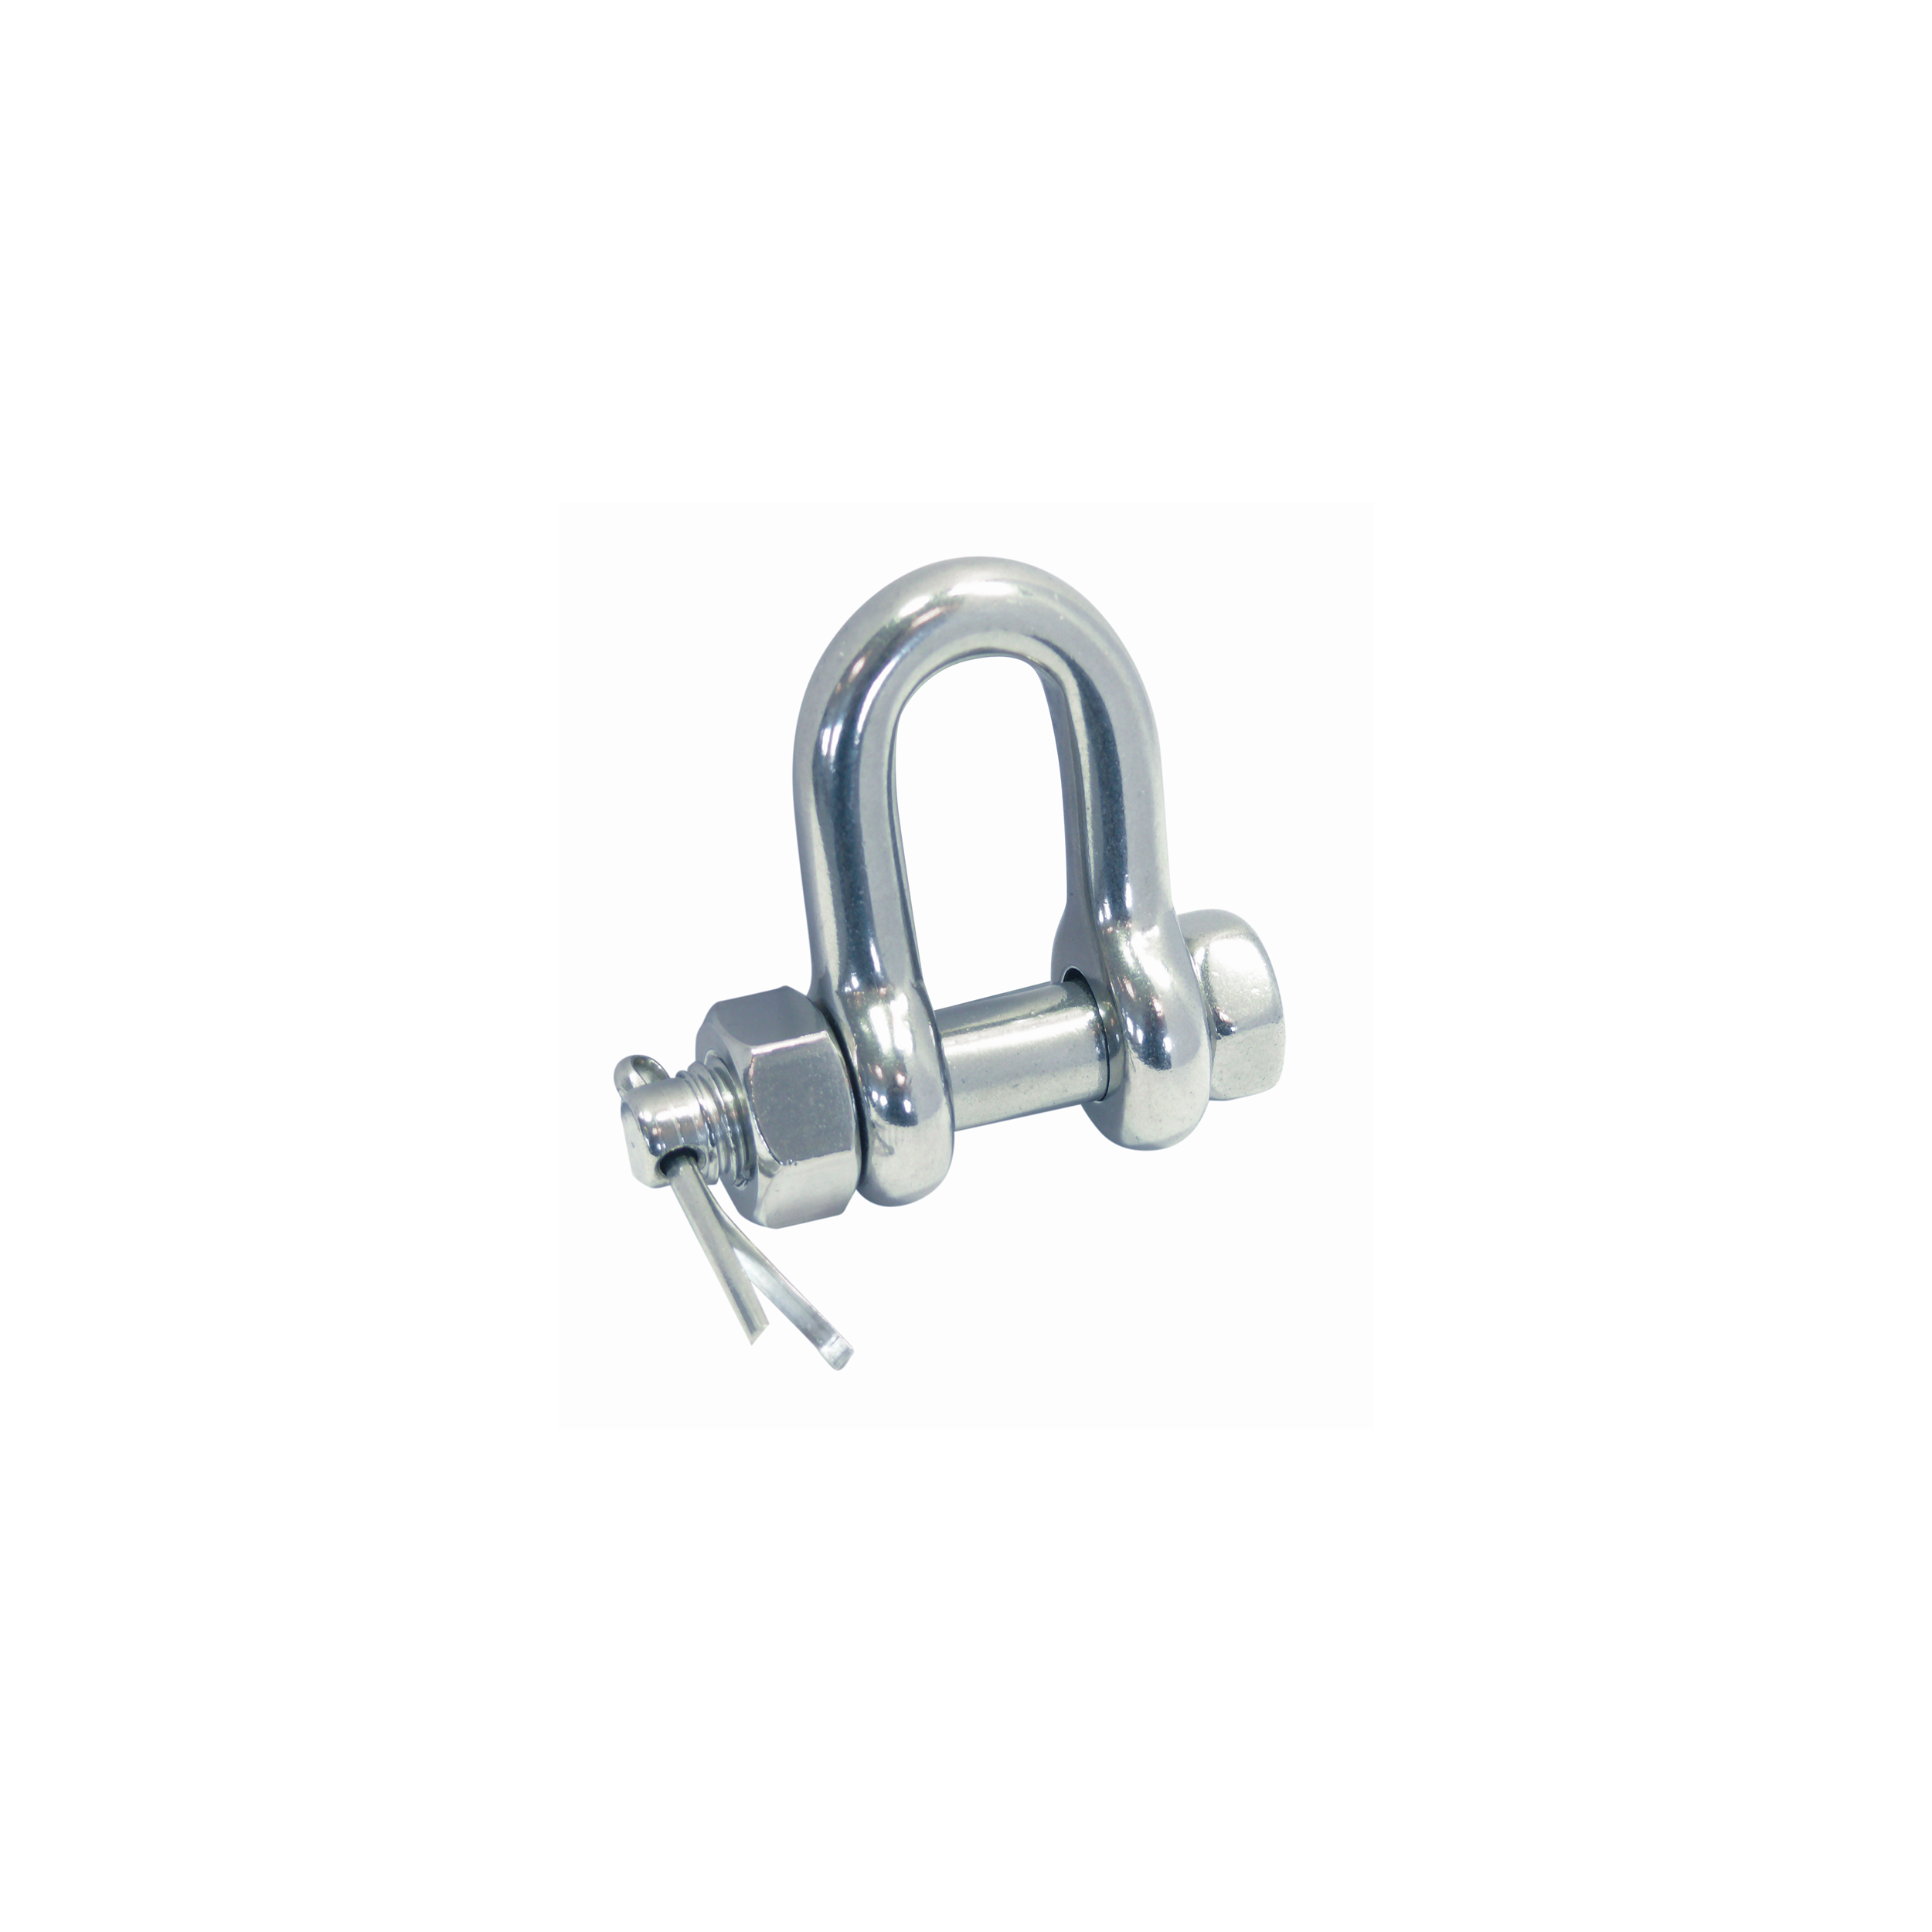 D-shackle with secure bolt A4  bolt 19mm, bow 16mm